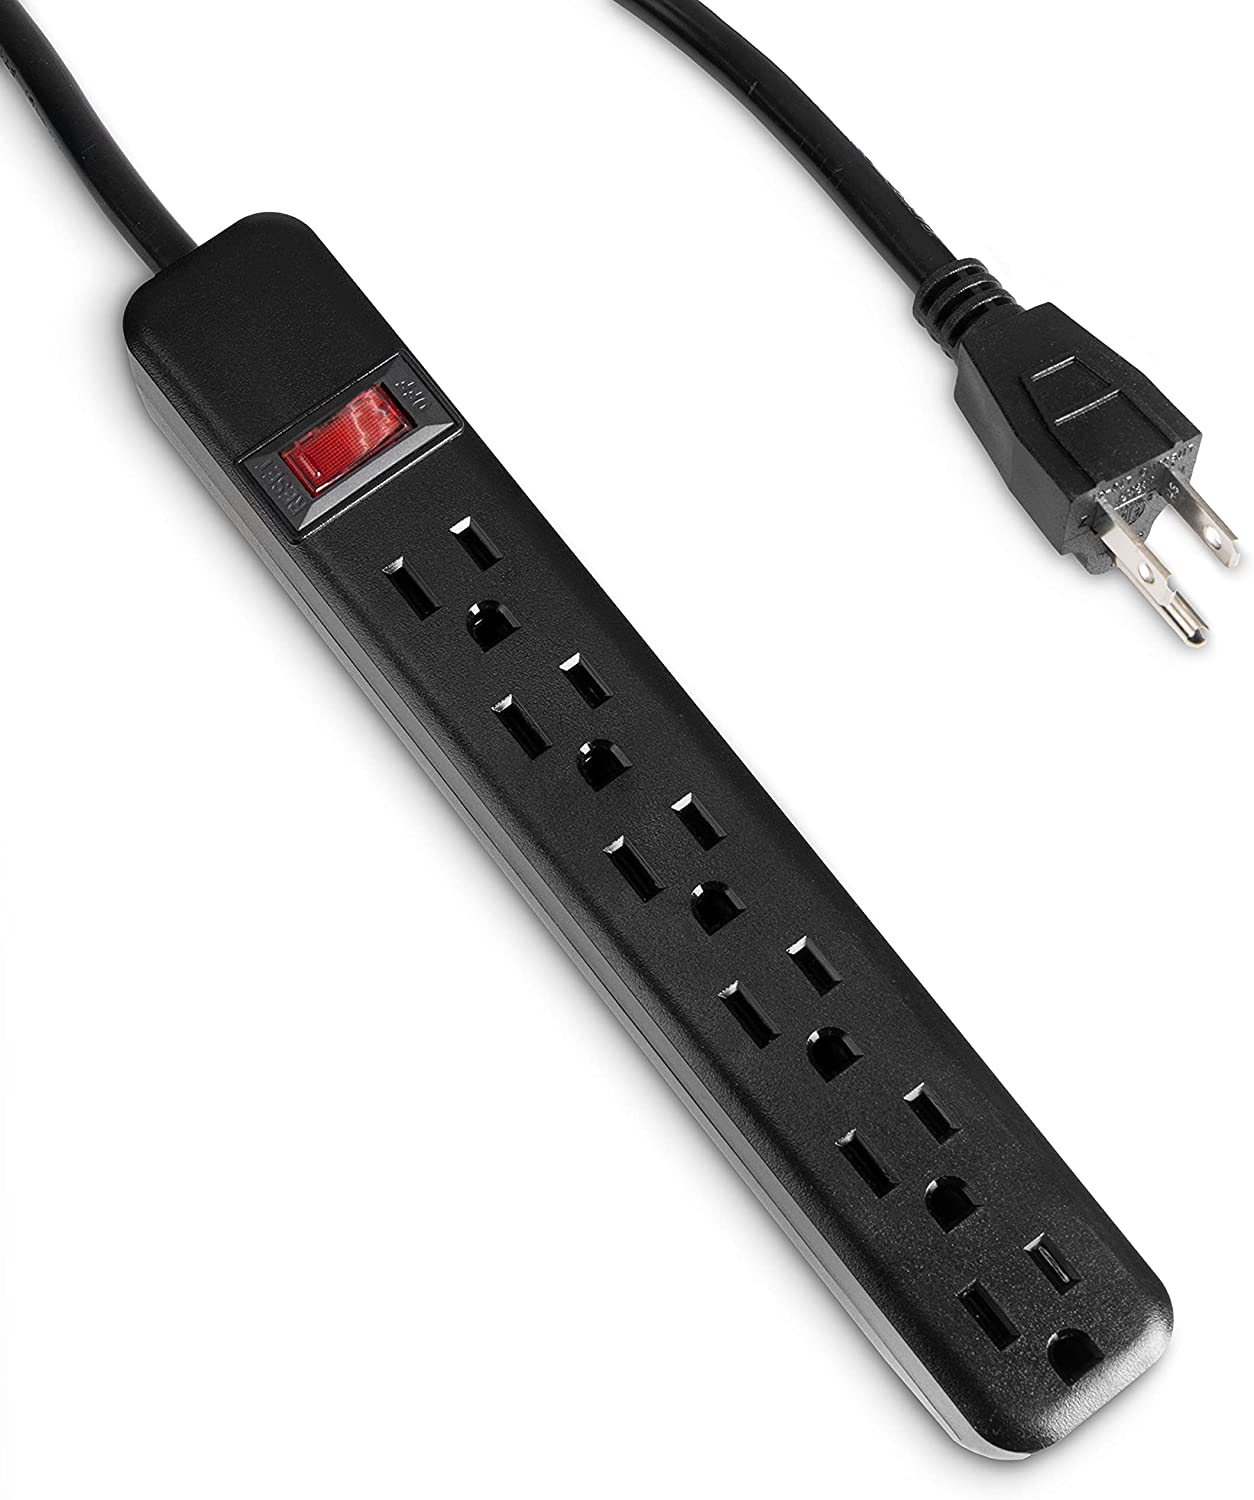 6 Outlet Surge Protector Power Strip - 14/3 SJT Black Surge Suppressor with 25 Foot Long Extension Cord, 15A/1875W, ETL Listed